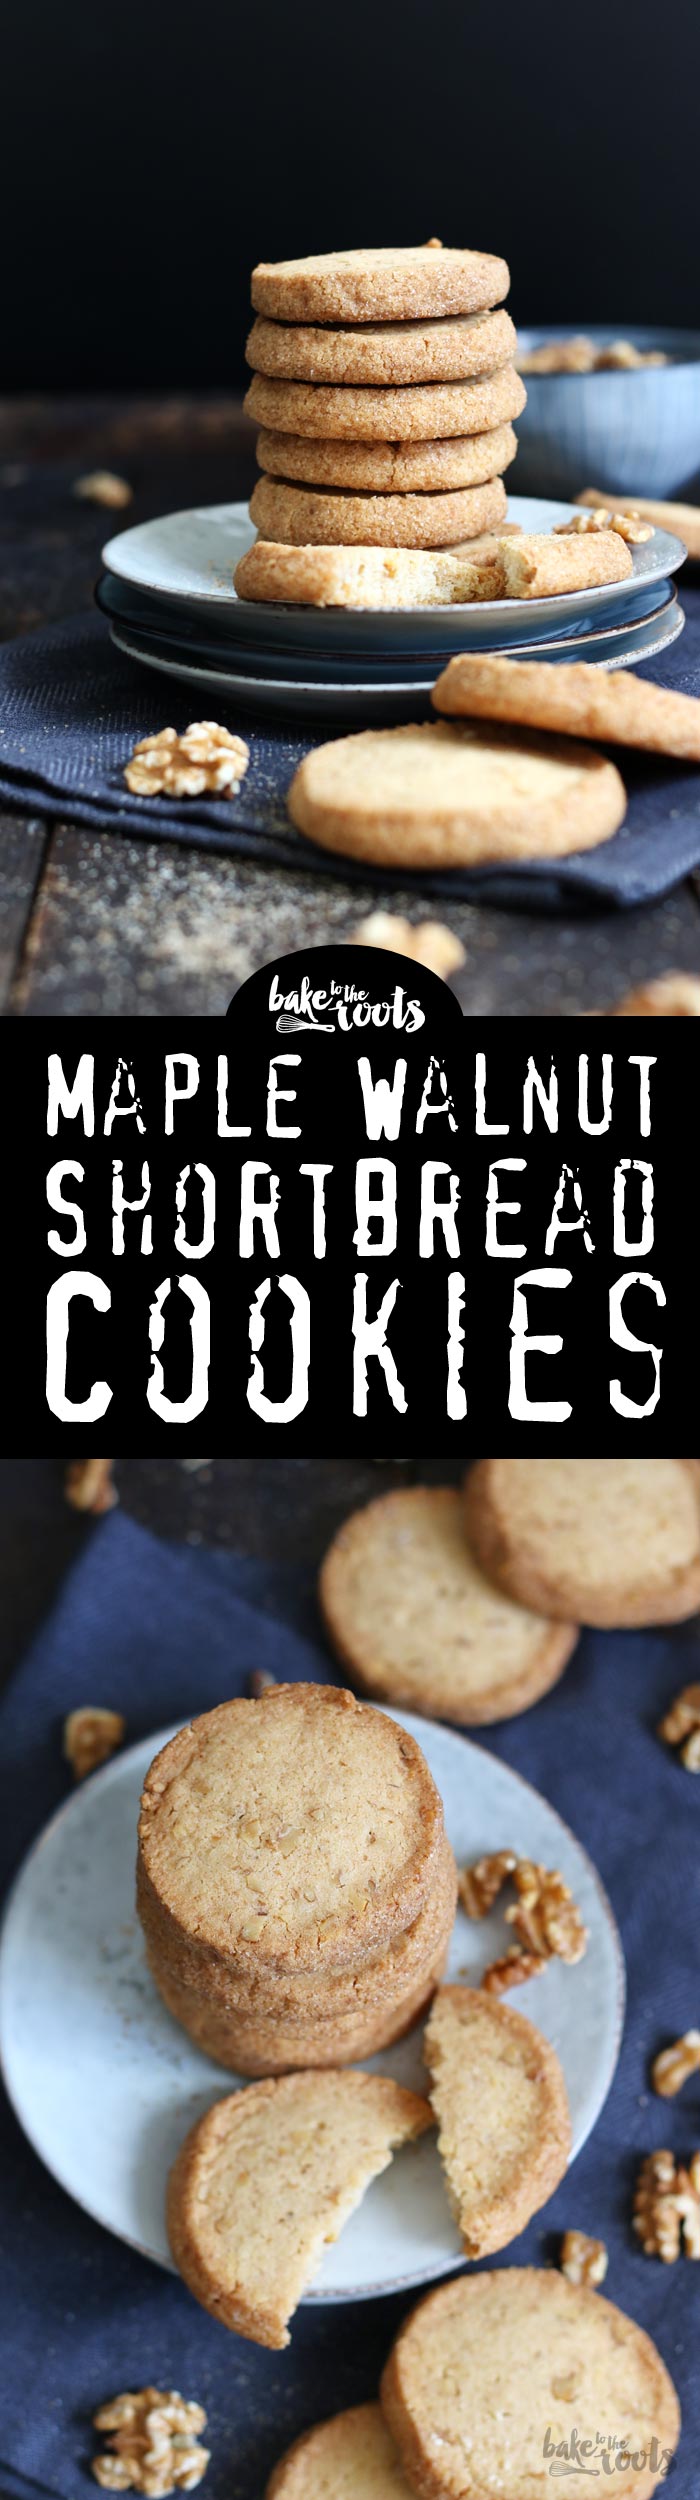 Delicious Shortbread Cookies with Walnuts and Maple Syrup | Bake to the roots